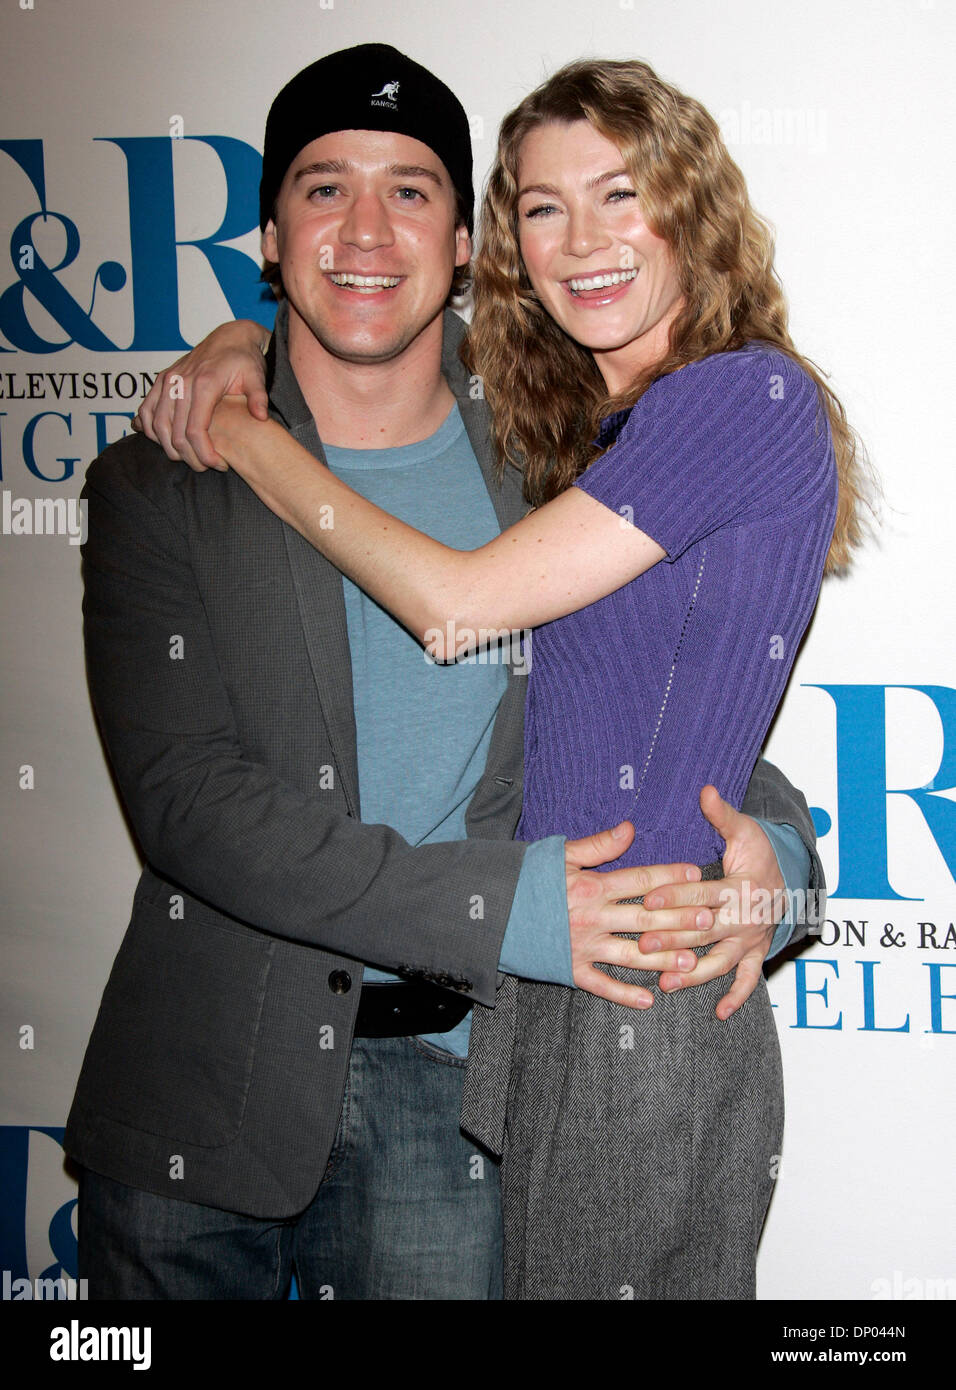 Feb 28, 2006; West Hollywood, California, USA; Actor T.R. KNIGHT & Actress ELLEN POMPEO at the 23rd Annual William S. Paley Television Festival Screening and Q&A of Grey's Anatomy at the DGA. Mandatory Credit: Photo by Lisa O'Connor/ZUMA Press. (©) Copyright 2006 by Lisa O'Connor Stock Photo